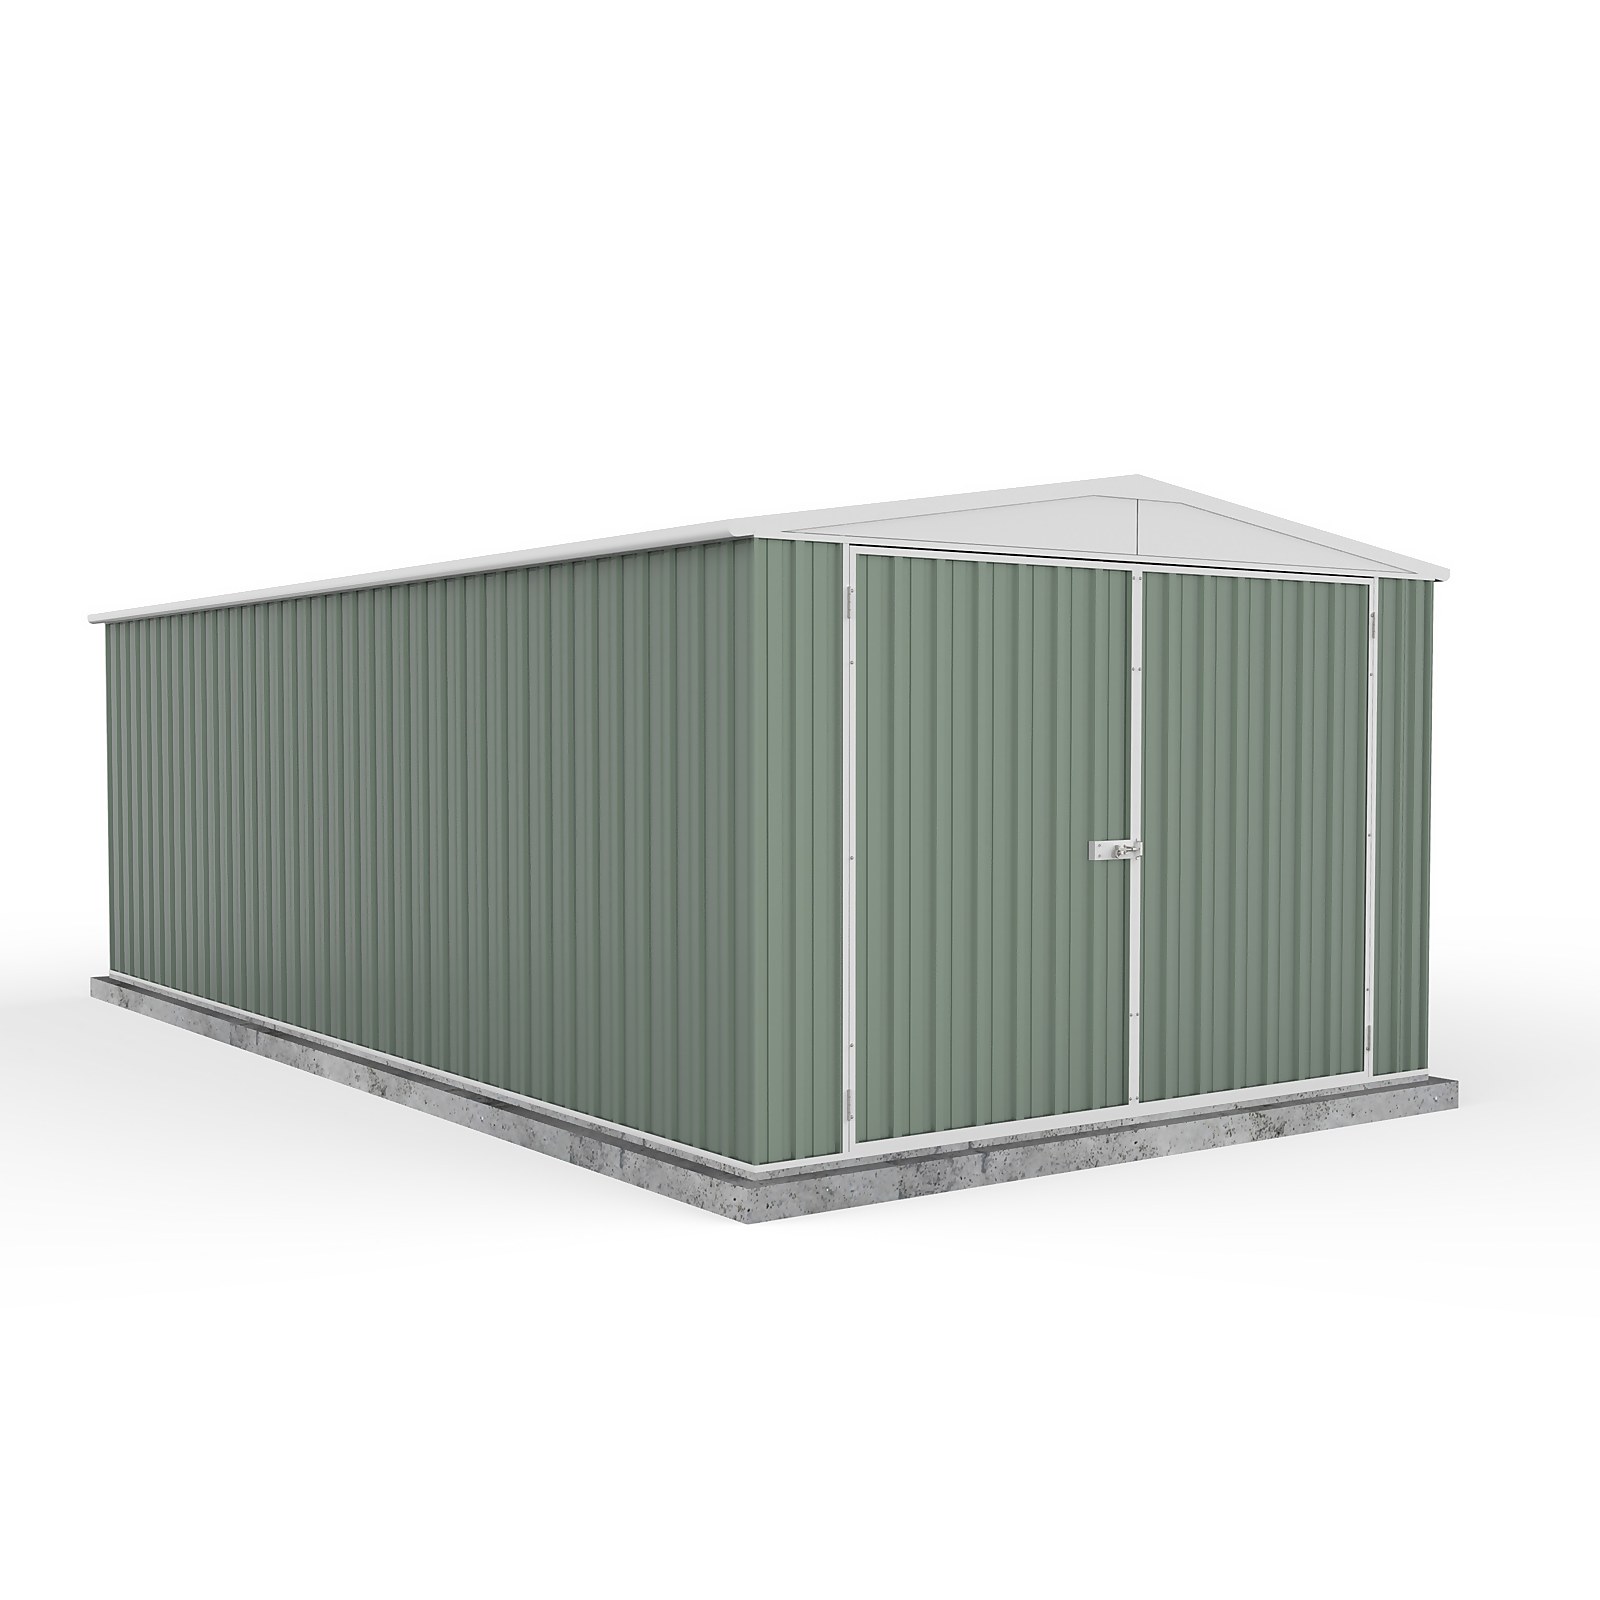 Absco 10x20ft Utility Workshop Apex Metal Shed - Green